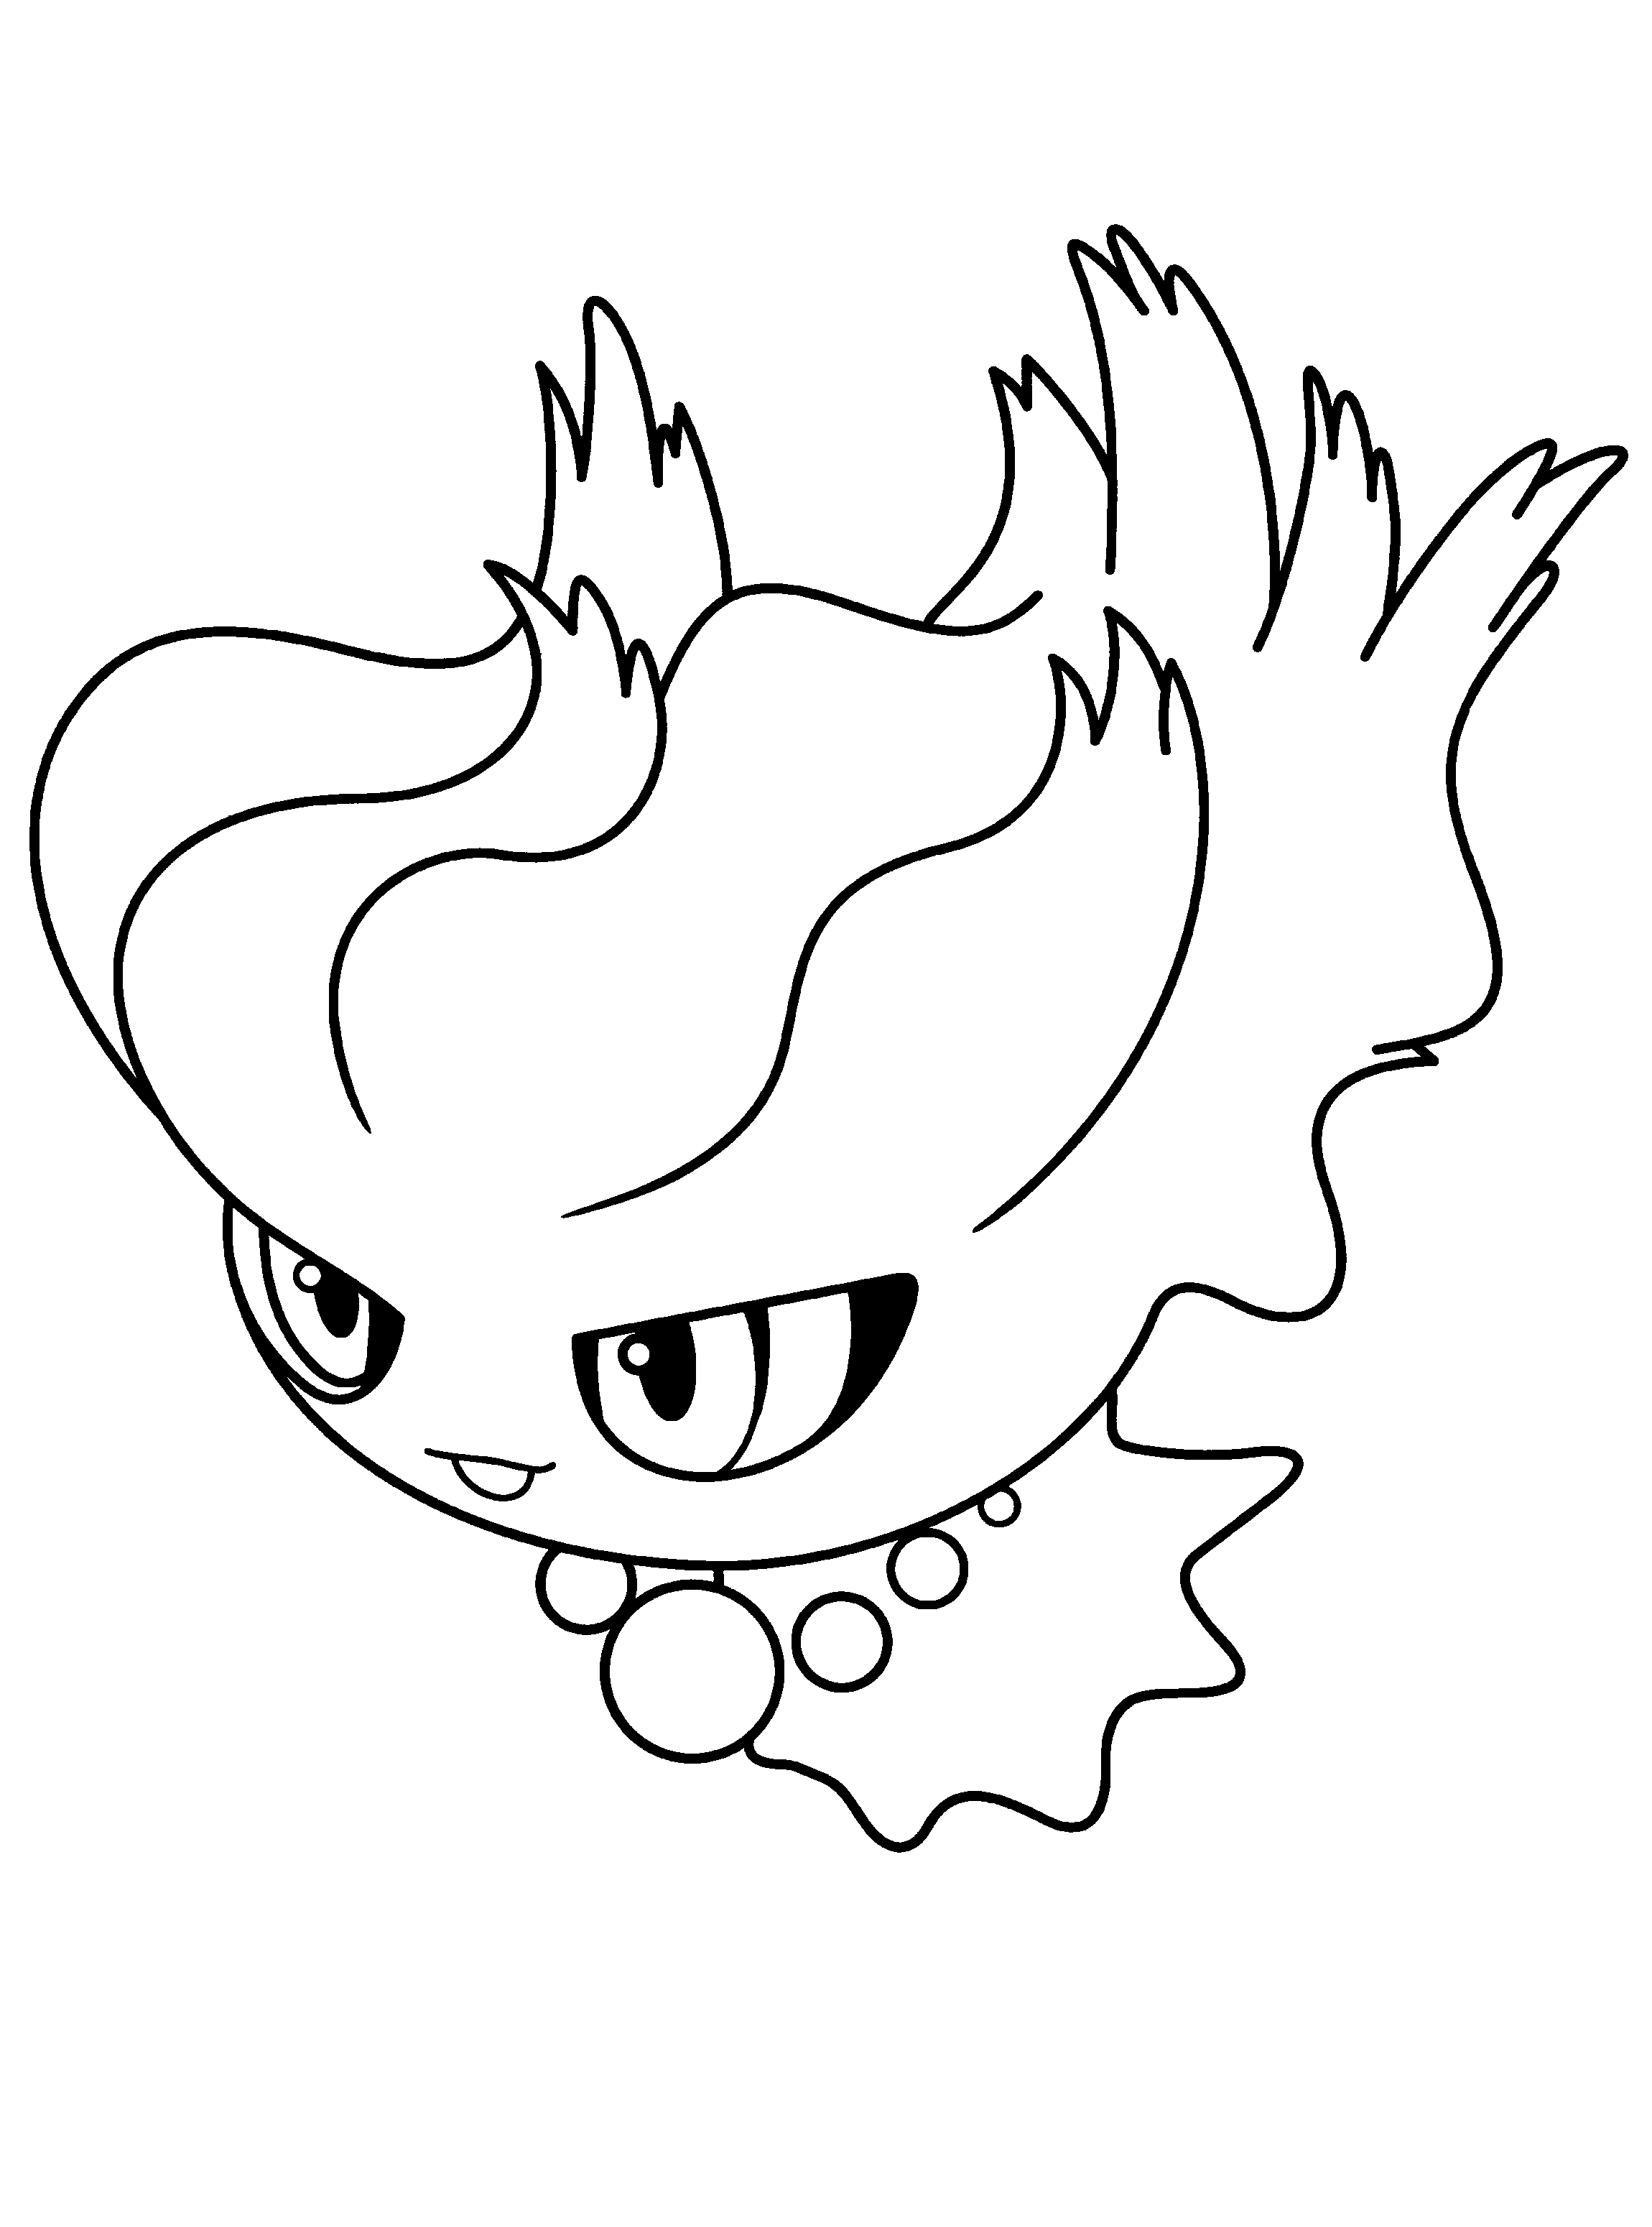 pokemon colouring pages online free pokemon coloring pages download pokemon images and print online pokemon free colouring pages 